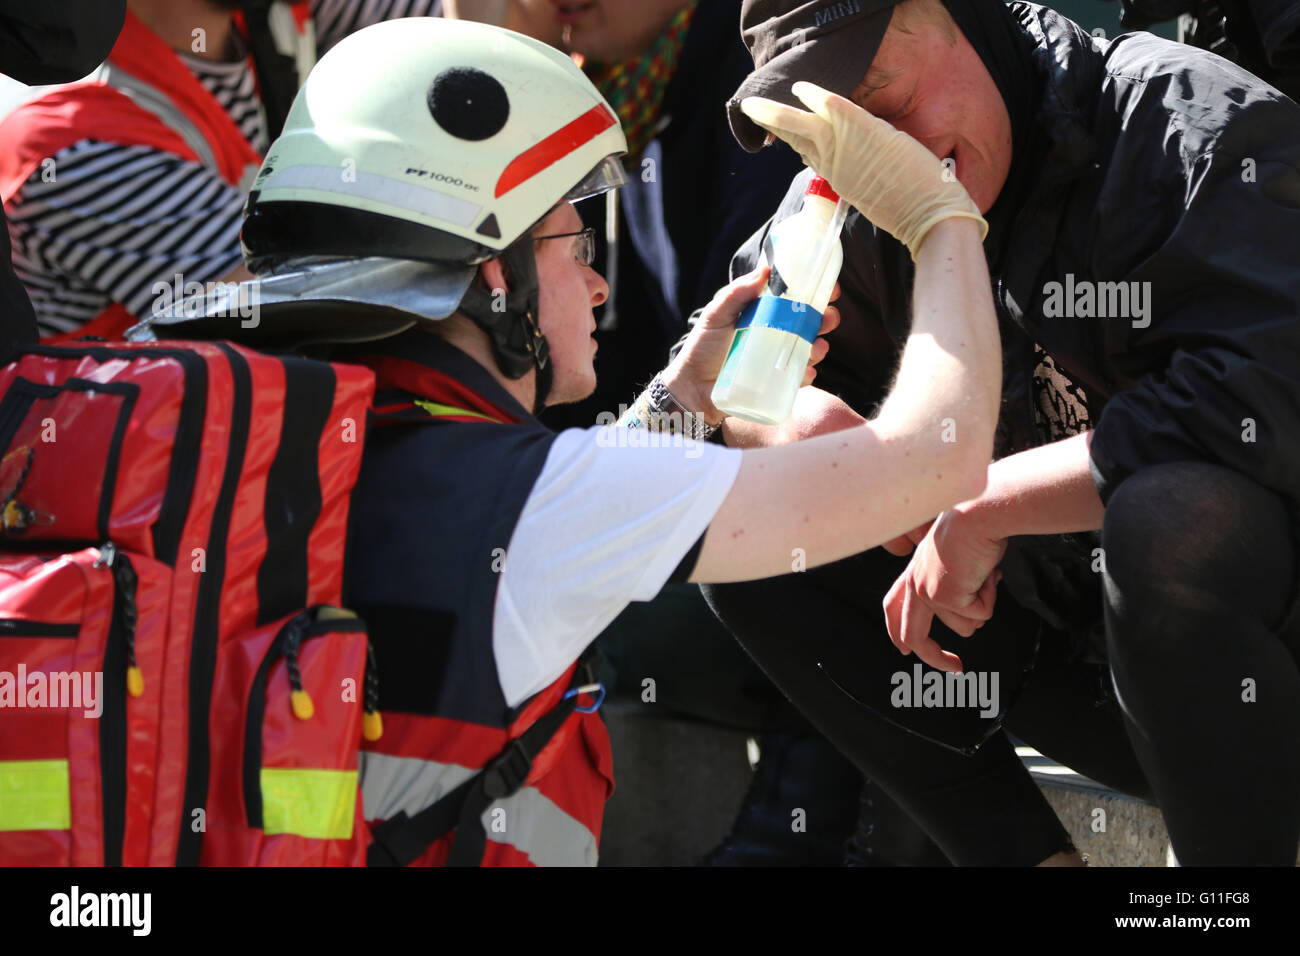 An anti-fascist protester is treated by a medic after being sprayed with CS gas by police. Thousands of anti-fascist campaigners held a counter protest against right-wing groups in Berlin. Hundreds of police lined the streets. Stock Photo